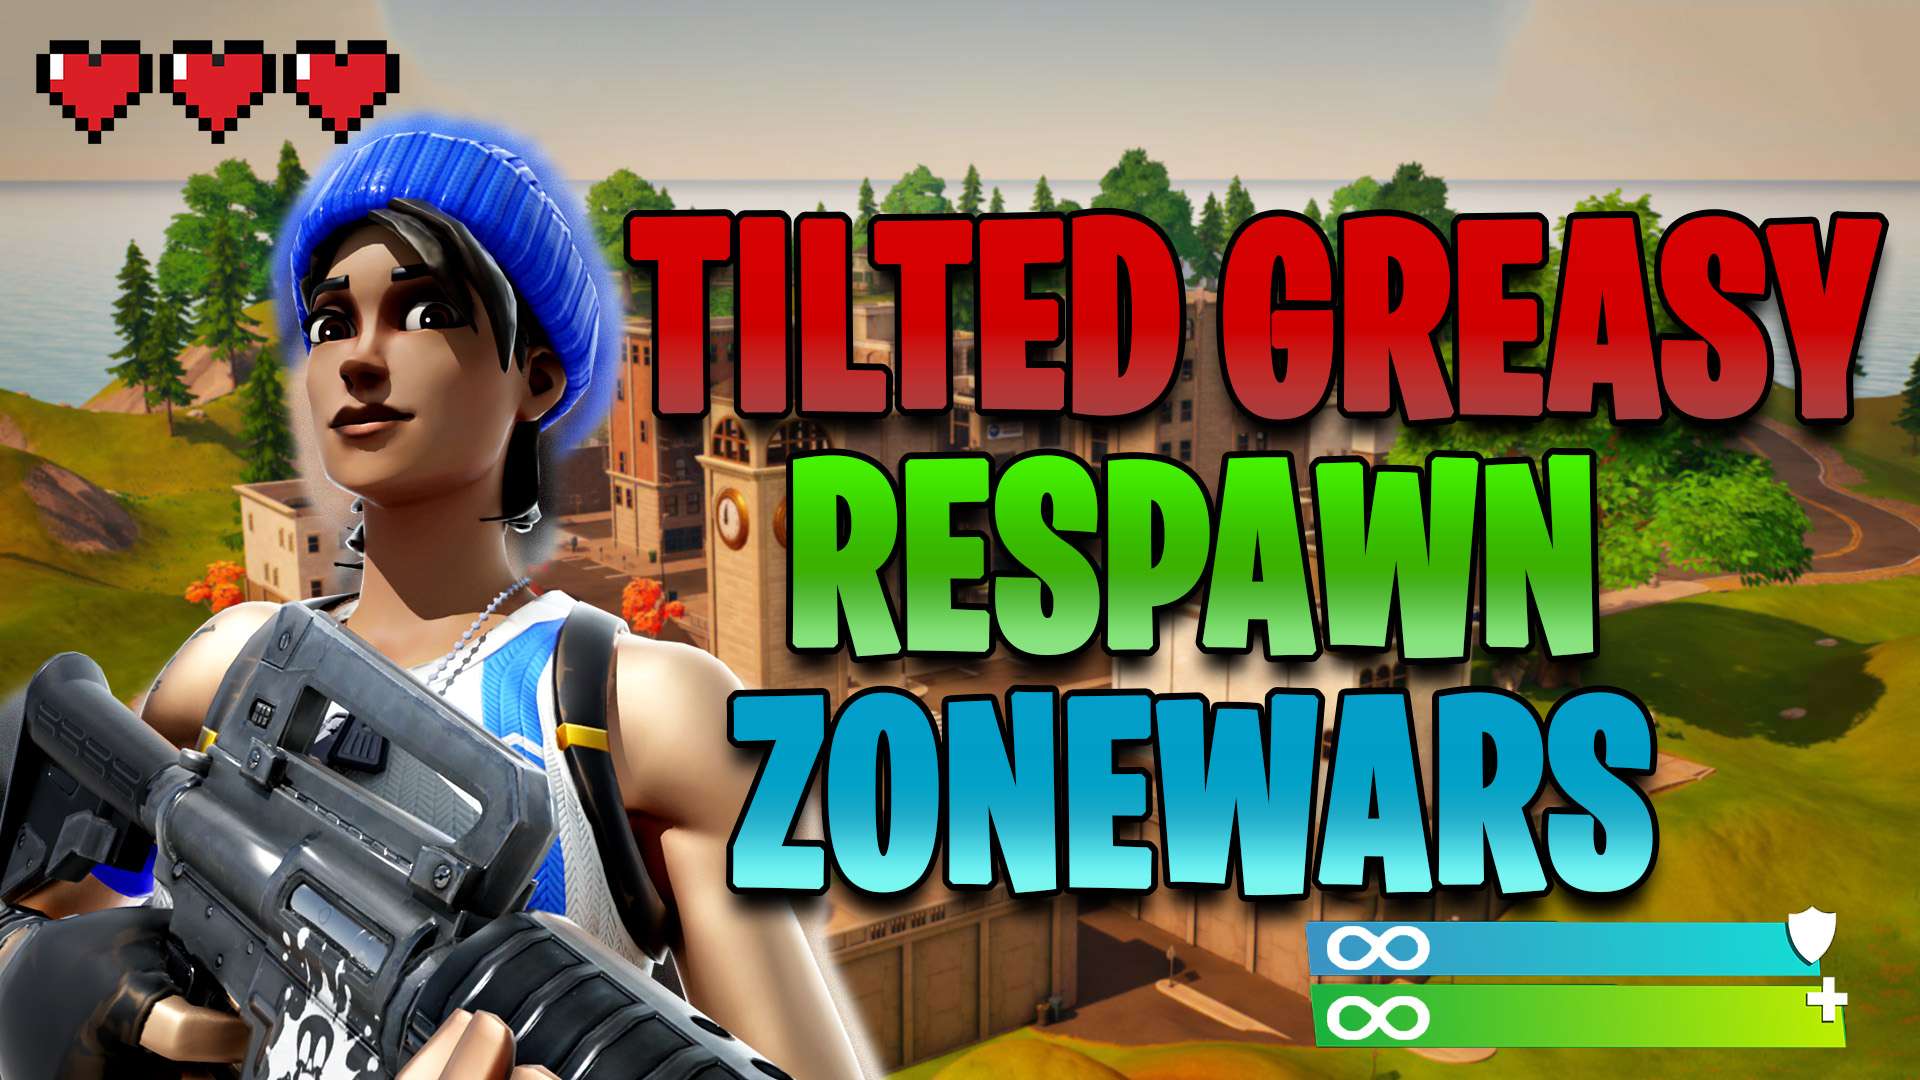 RESPAWN ZONE WARS (TILTED AND GREASY)